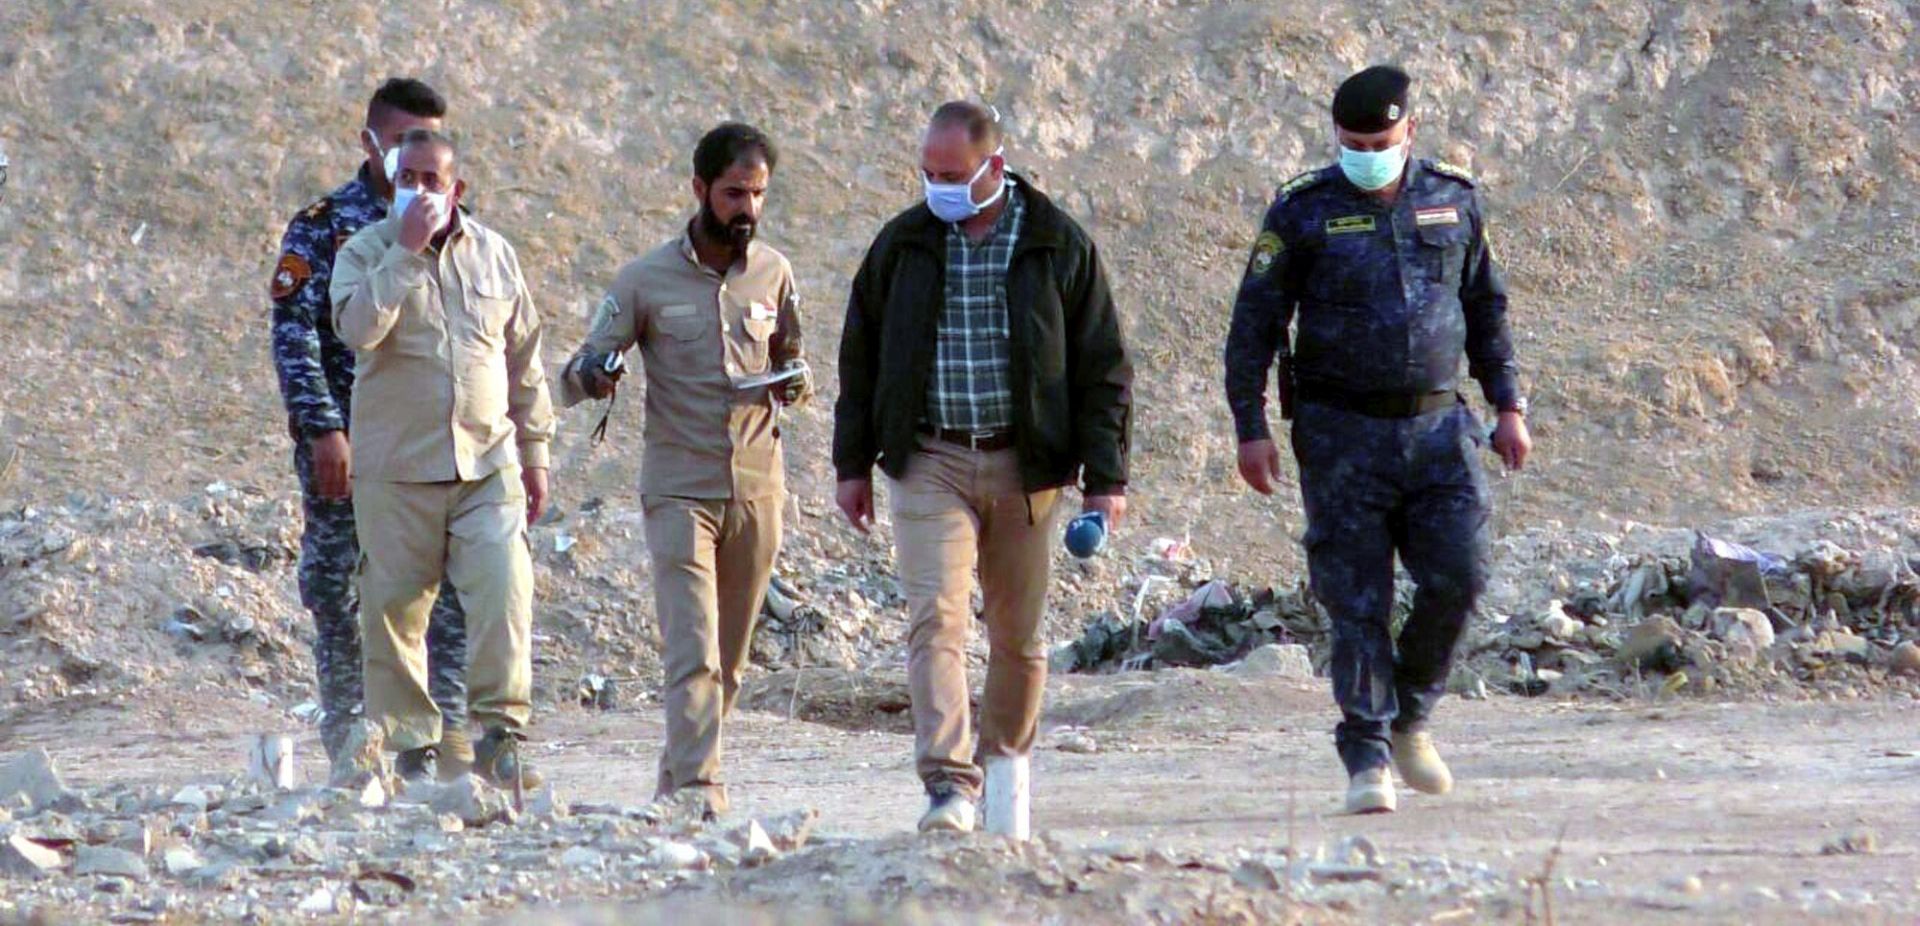 epa05622377 Iraqi officers and forensics personnel team inspect a site believed to be a mass grave, in Hamam al-Alil town, southern Mosul, Iraq, 08 November 2016. Reports state that Iraqi security officials found a mass grave in Hamam al-Alil town, containing some 100 bodies of people believed to be victims of the Islamic State (IS) militants, who were holding the town for more than two years ago.  EPA/STR